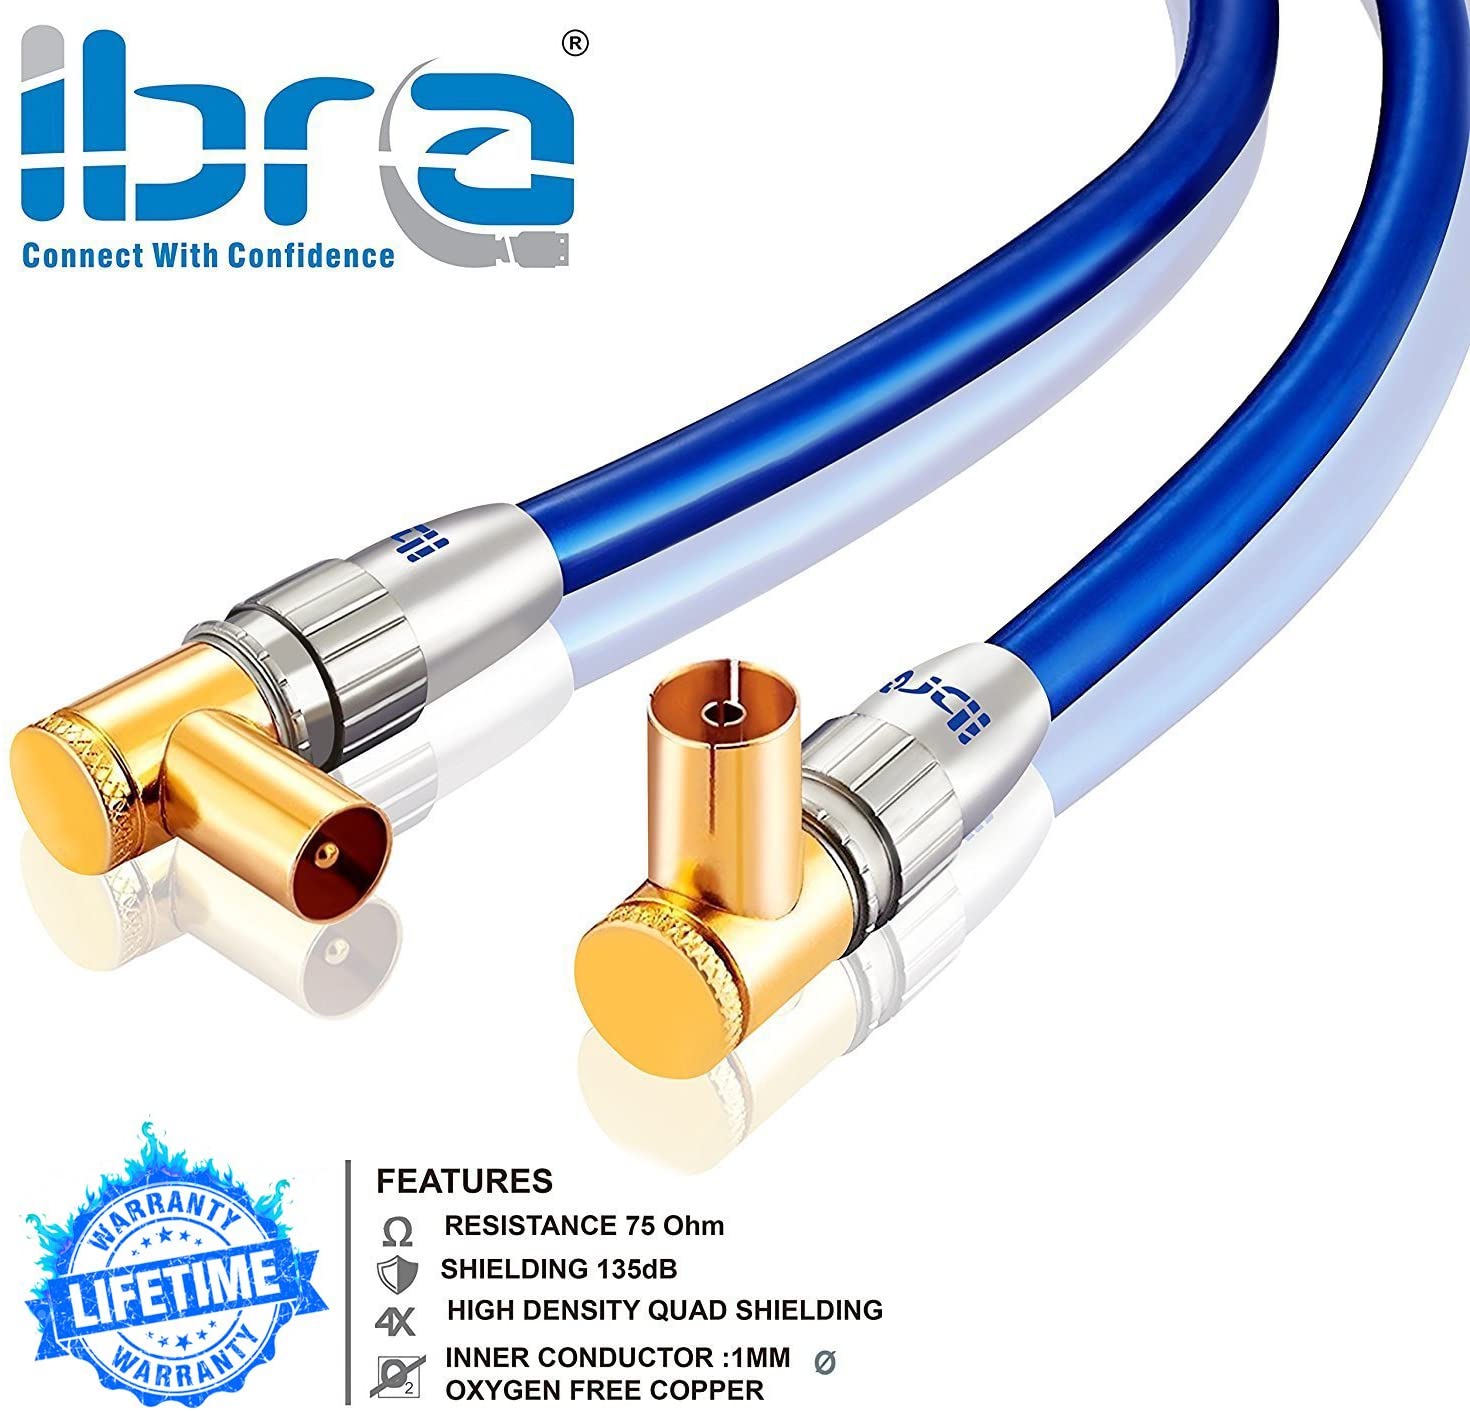 12.5m IBRA HDTV Antenna Cable | TV Aerial Cable with 90 Degree Right Angled Connectors | Premium Freeview Coaxial Cable | 90° Angled Connectors: Coax Male to Female |For UHV/UHF/RF DVB-T1/T2